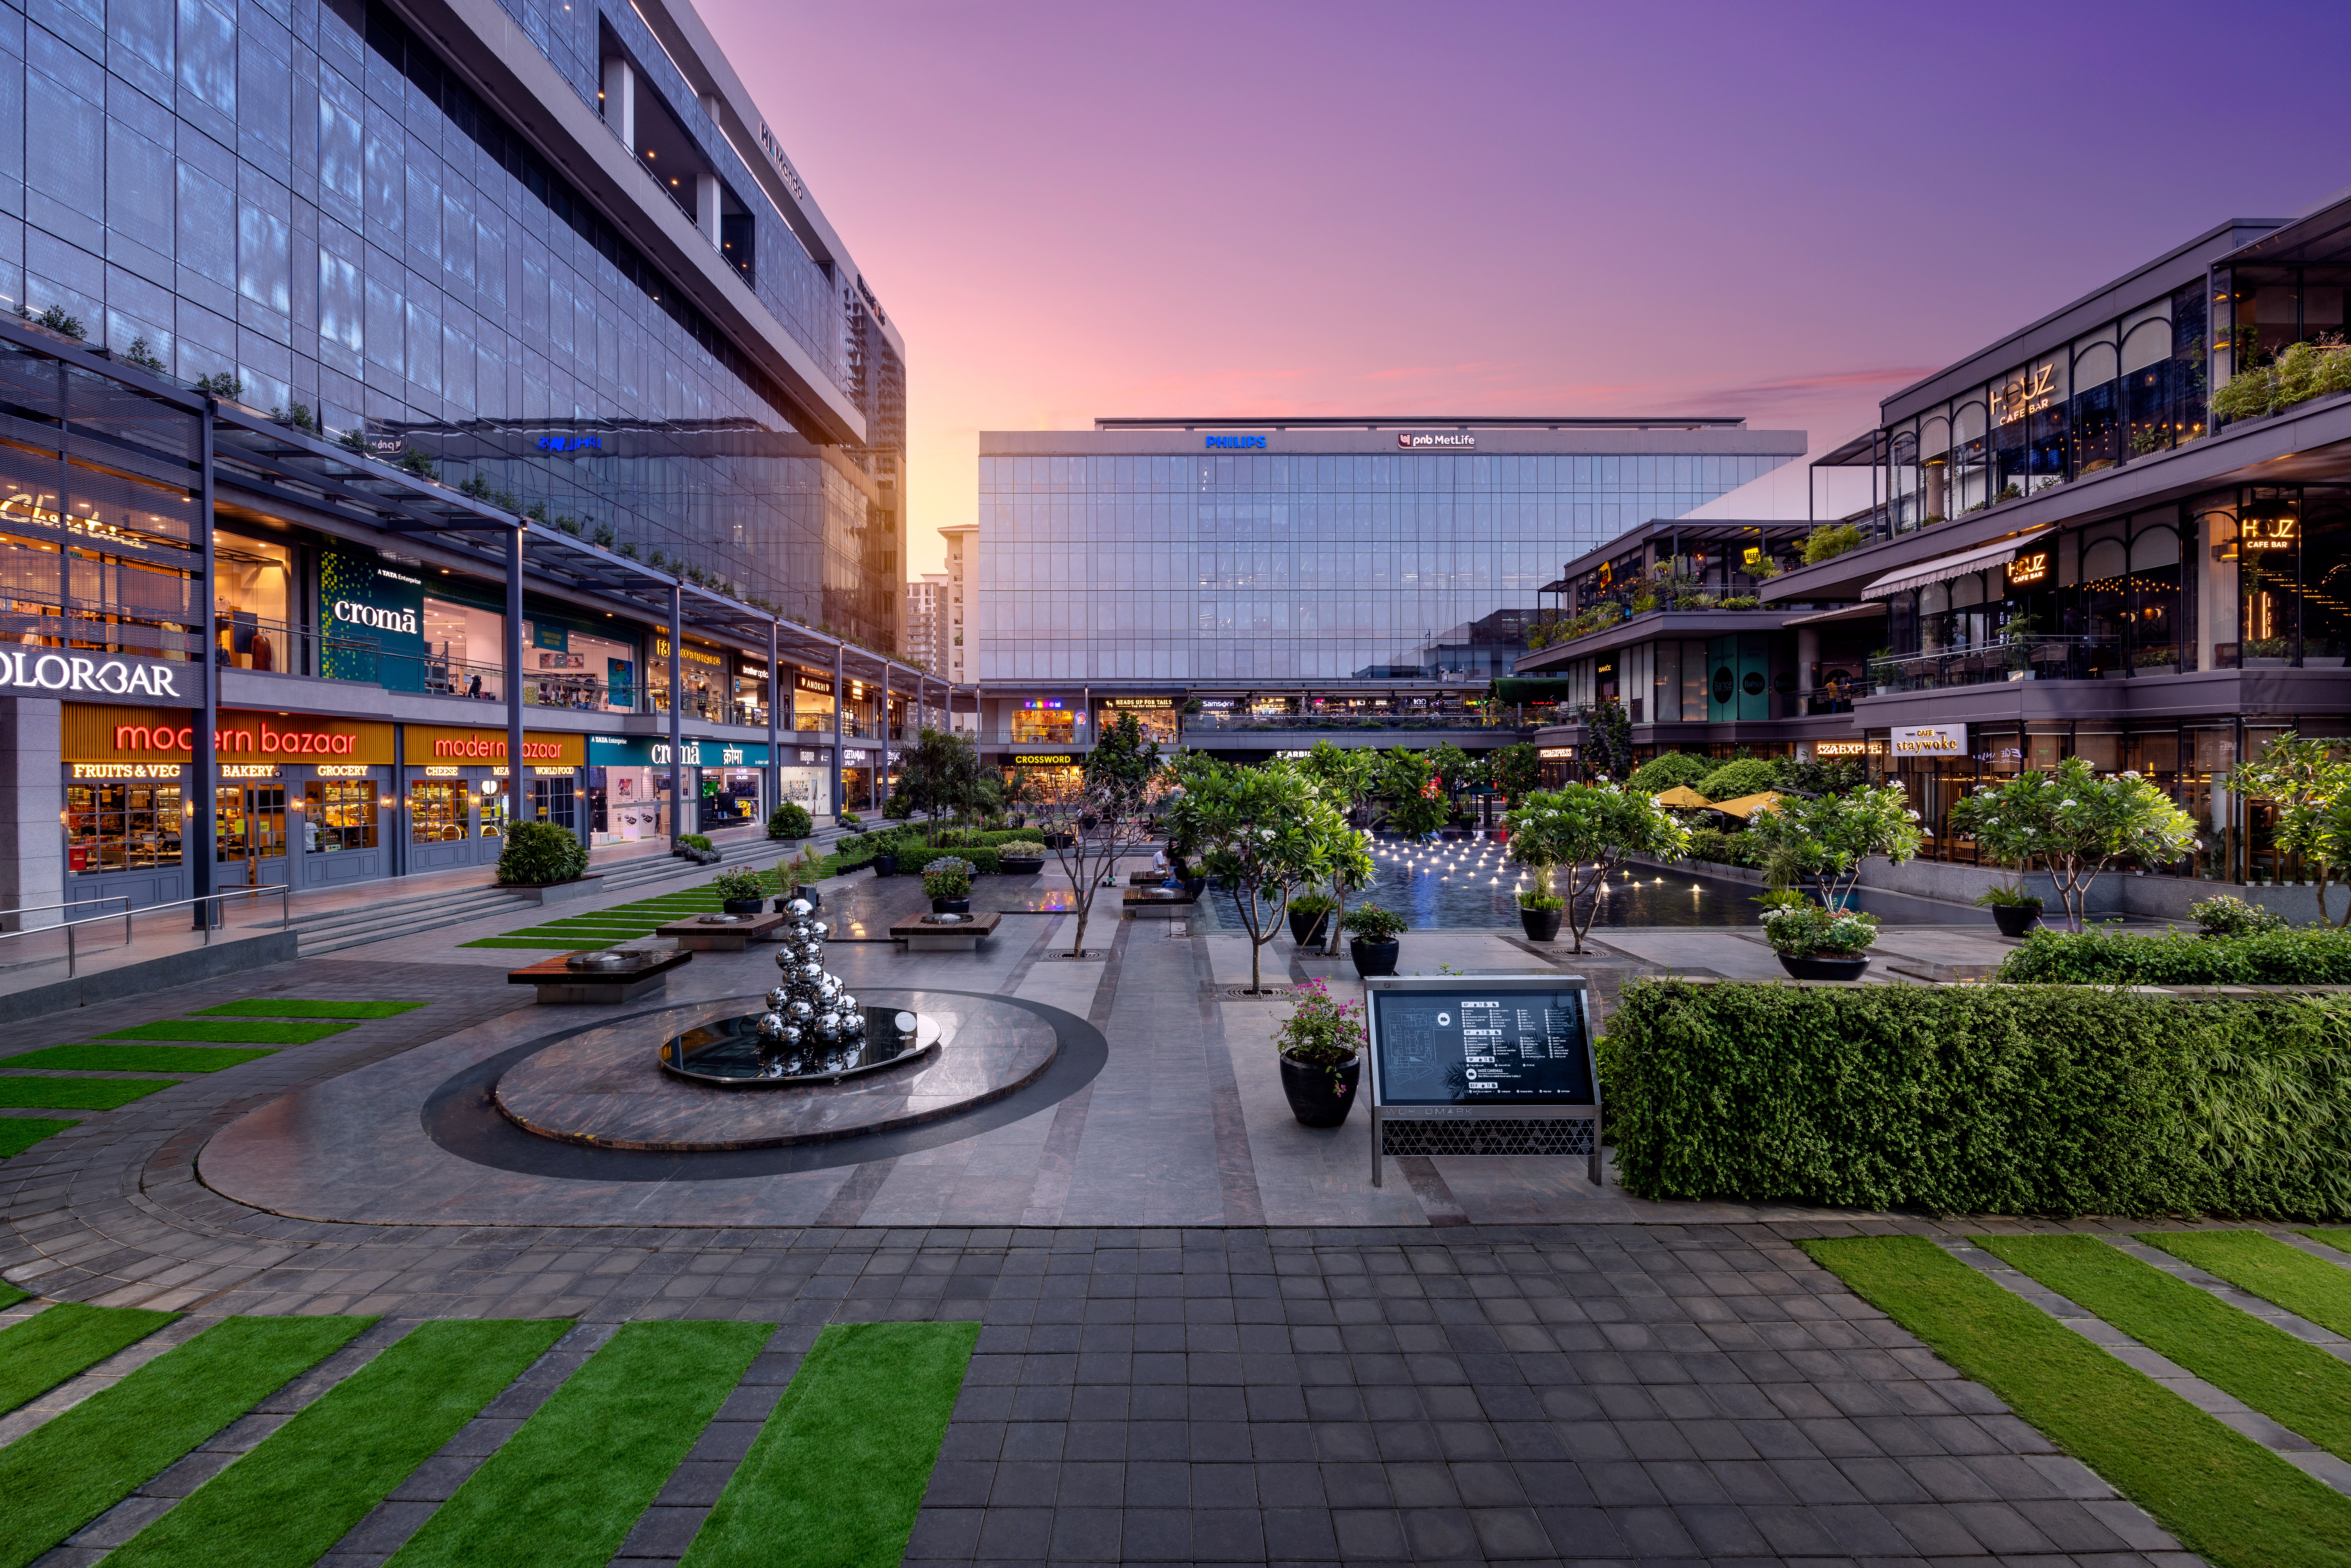 Courtyard with surrounding retail at dusk